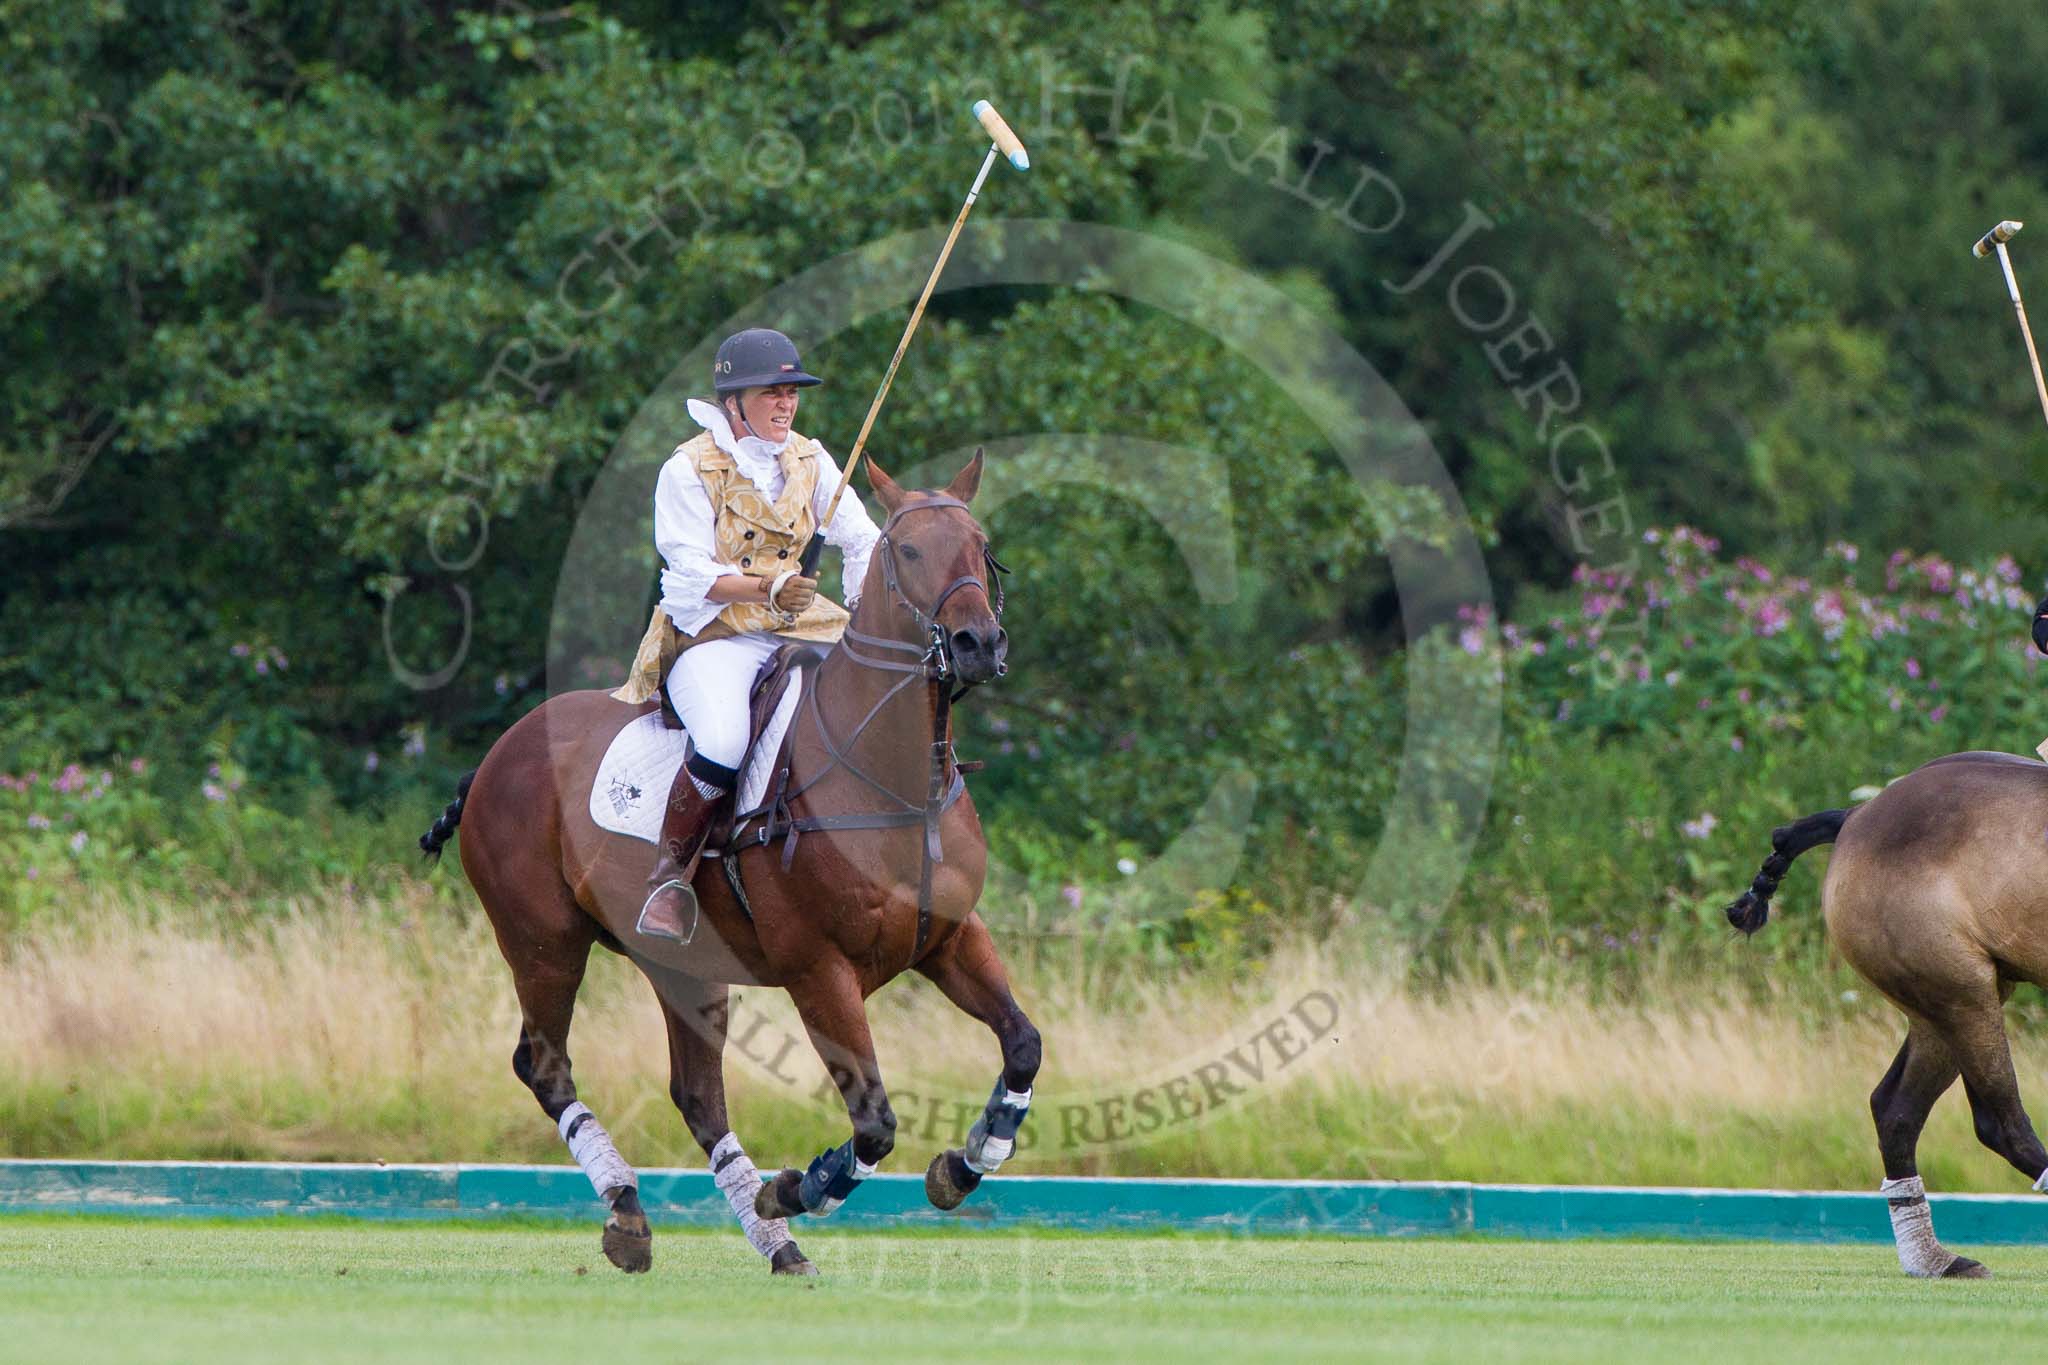 7th Heritage Polo Cup finals: Barbara P Zingg..
Hurtwood Park Polo Club,
Ewhurst Green,
Surrey,
United Kingdom,
on 05 August 2012 at 15:16, image #144